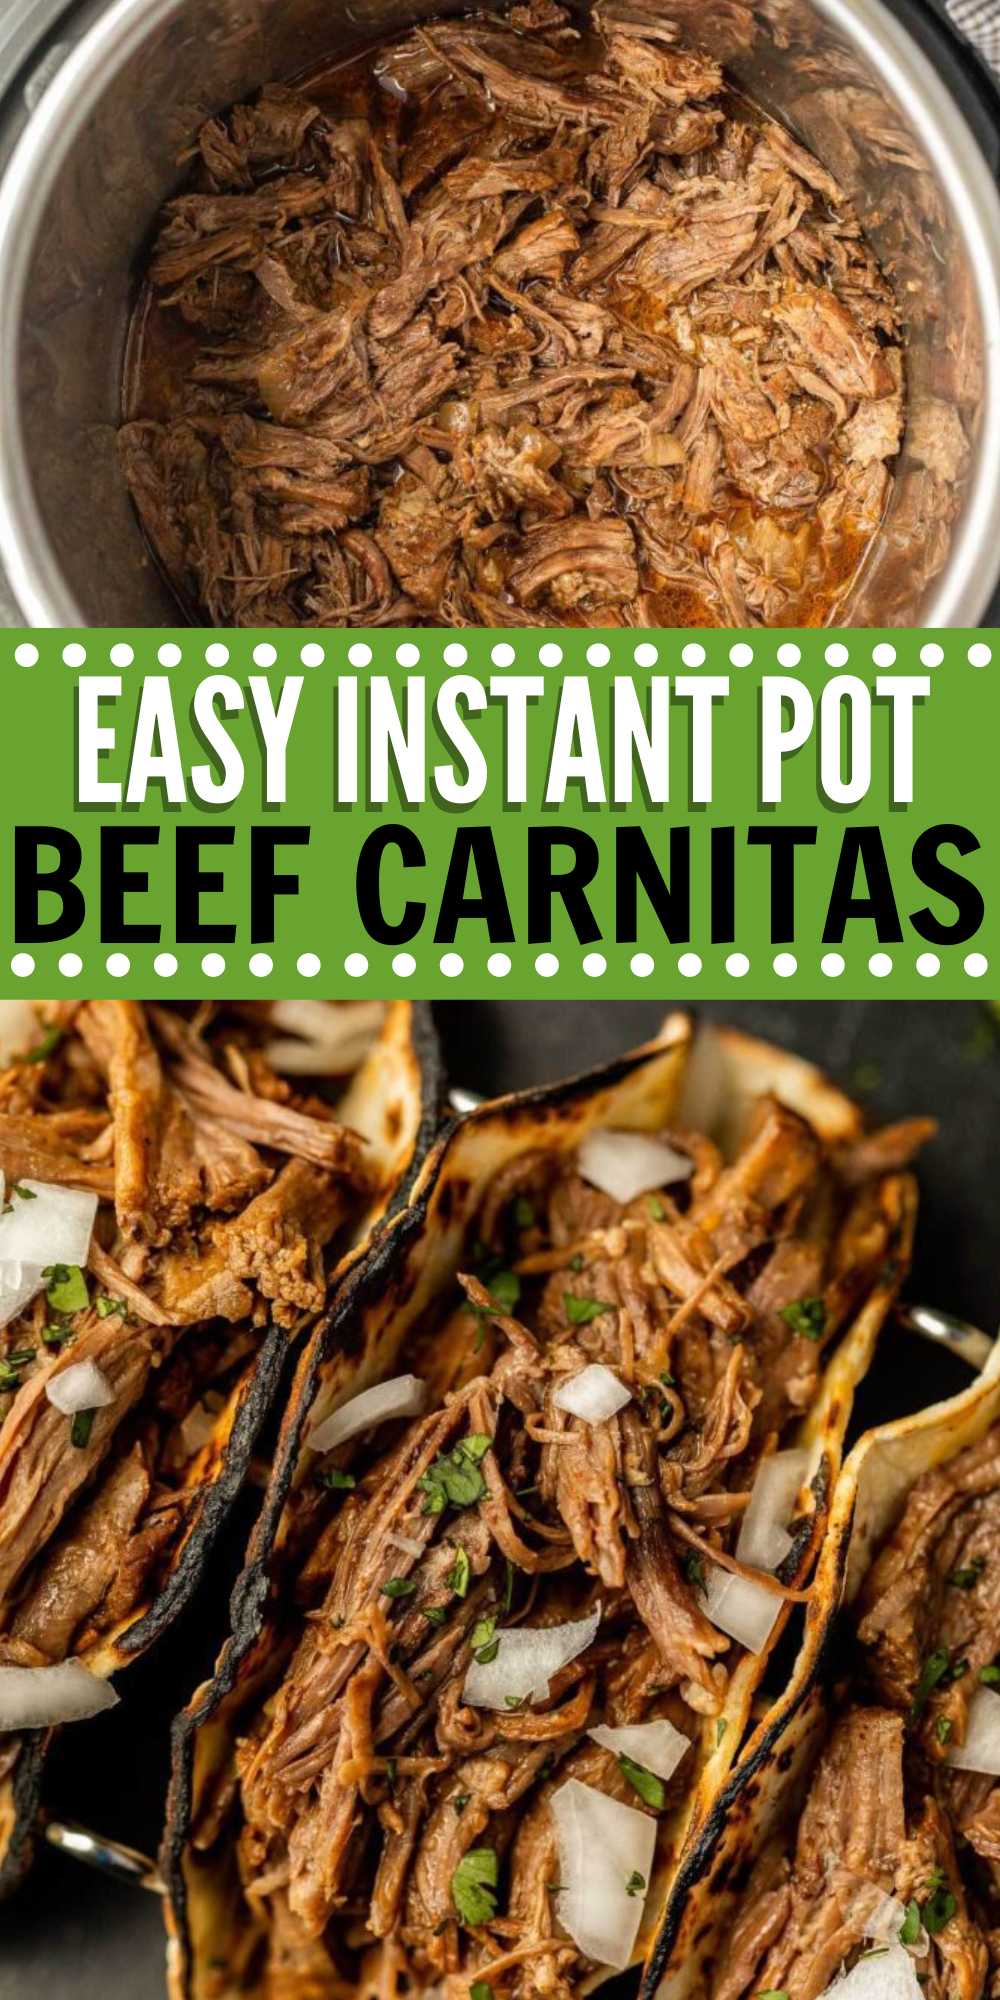 Make Instant Pot Beef Carnitas is a delicious recipe that can be used for many different recipes. This recipe is flavor and easy to make. The seasoning are simple and dinner can ready in less than 2 hours for a delicious meal idea. Shred the beef and serve with your favorite toppings. This beef carnitas is great to feed a crowd or a weekend meal. #eatingonadime #instantpotbeefcarnitas #beefcarnitas